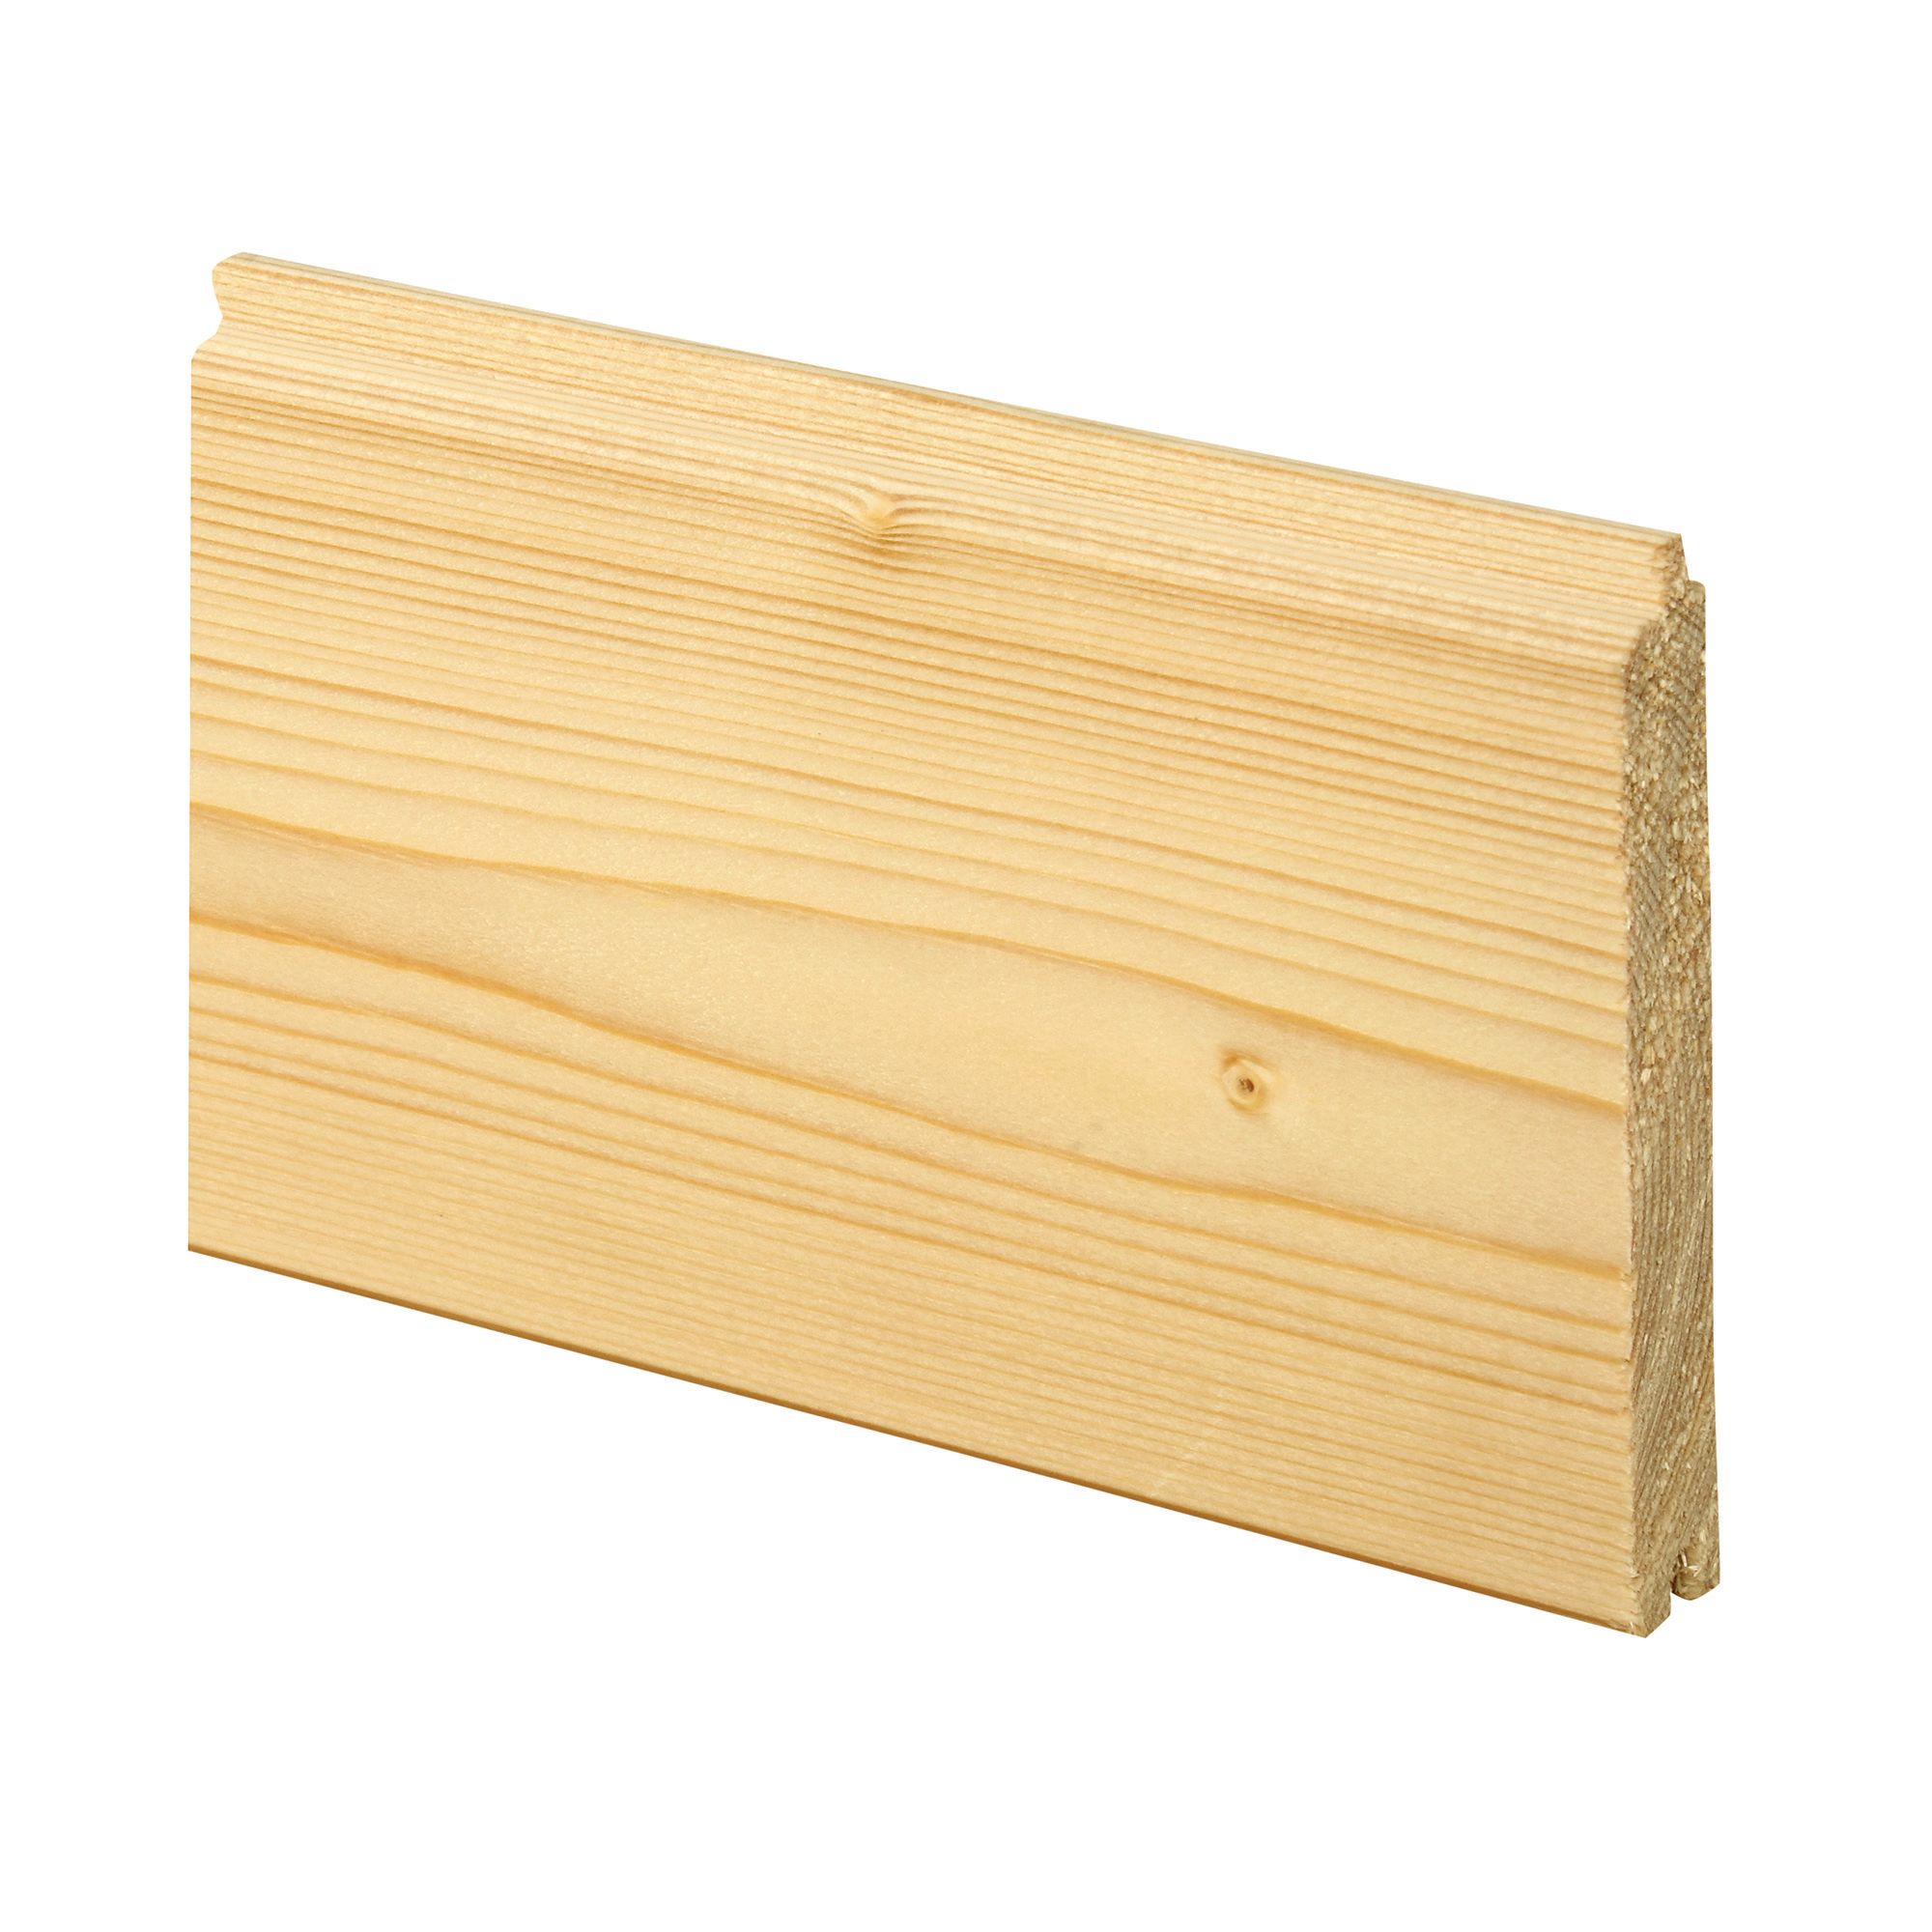 Image of Wickes General Purpose Softwood Cladding - 14mm x 94mm x 2400mm Pack of 4